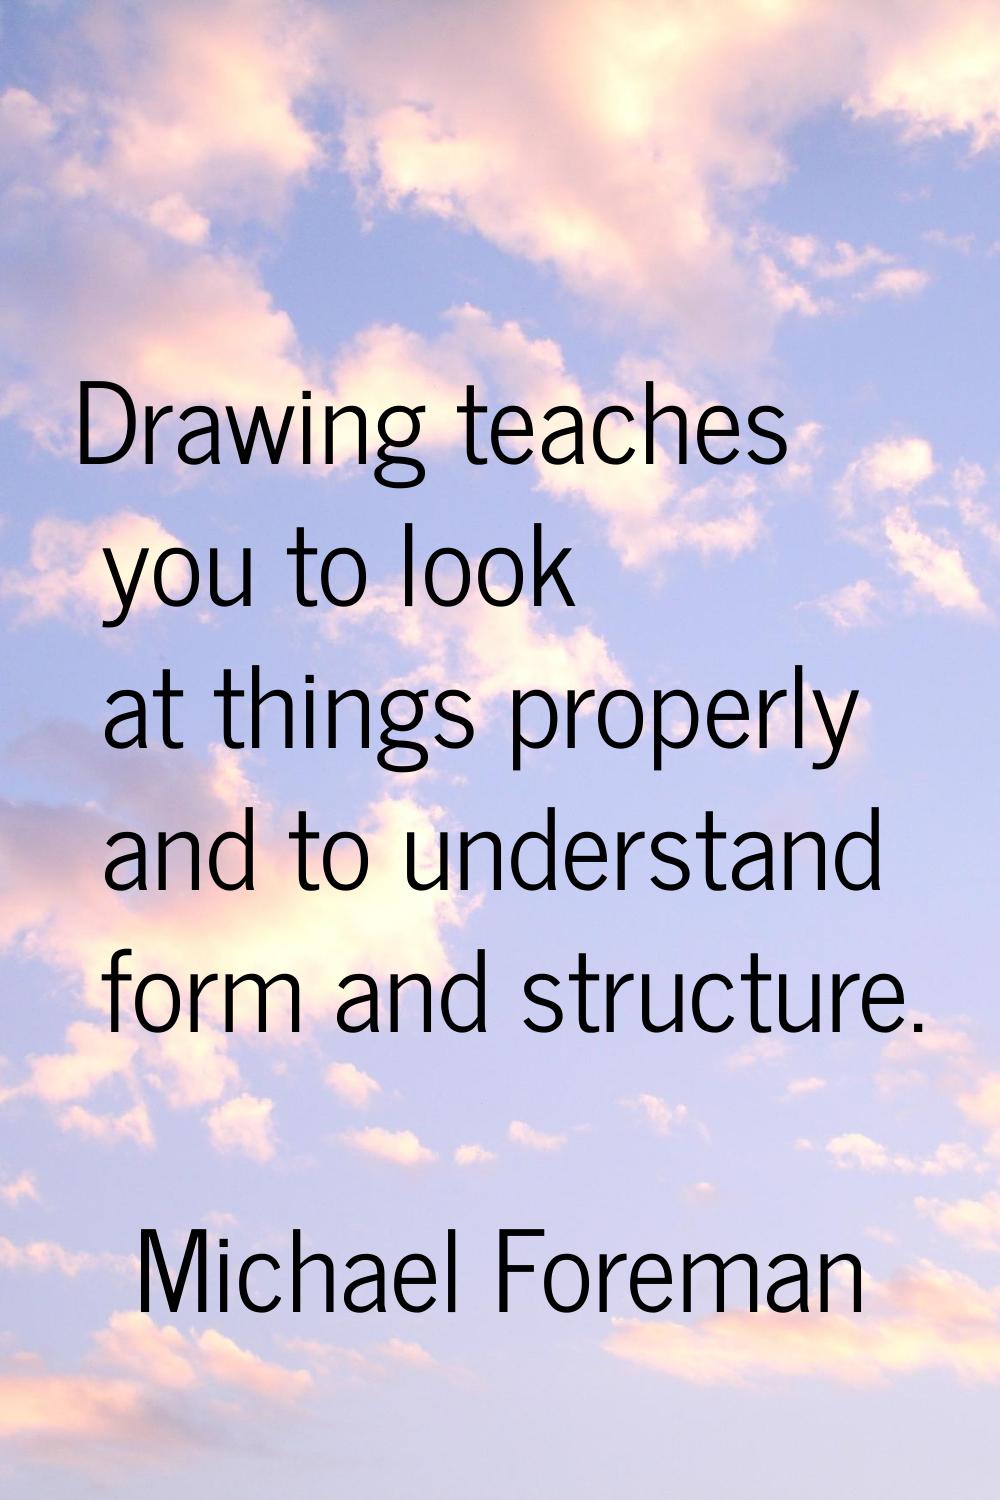 Drawing teaches you to look at things properly and to understand form and structure.